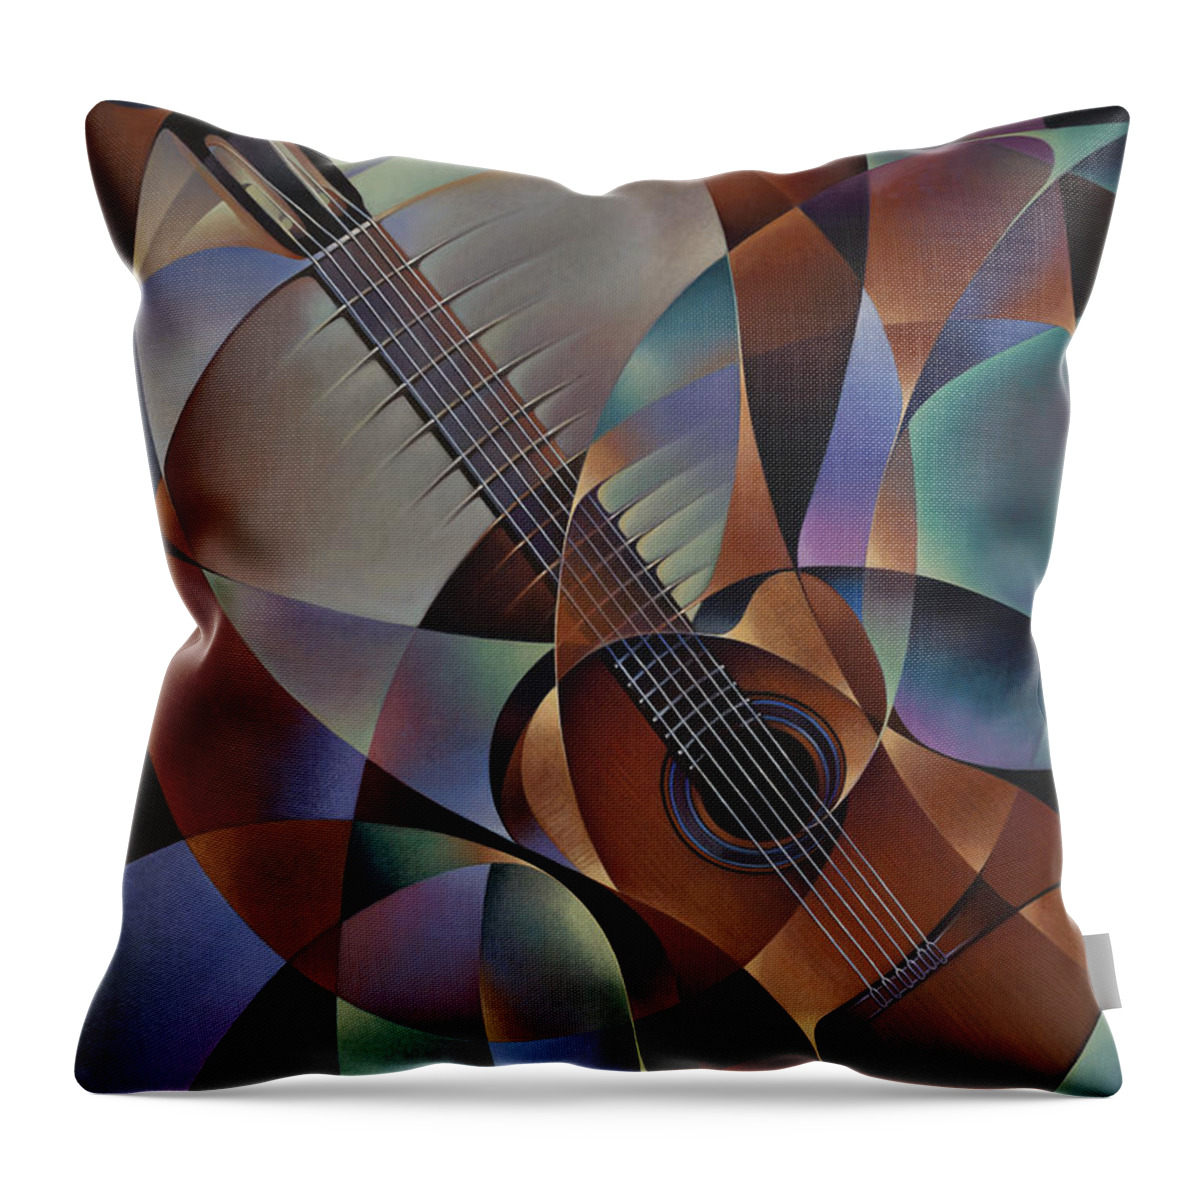 Violin Throw Pillow featuring the painting Dynamic Guitar by Ricardo Chavez-Mendez